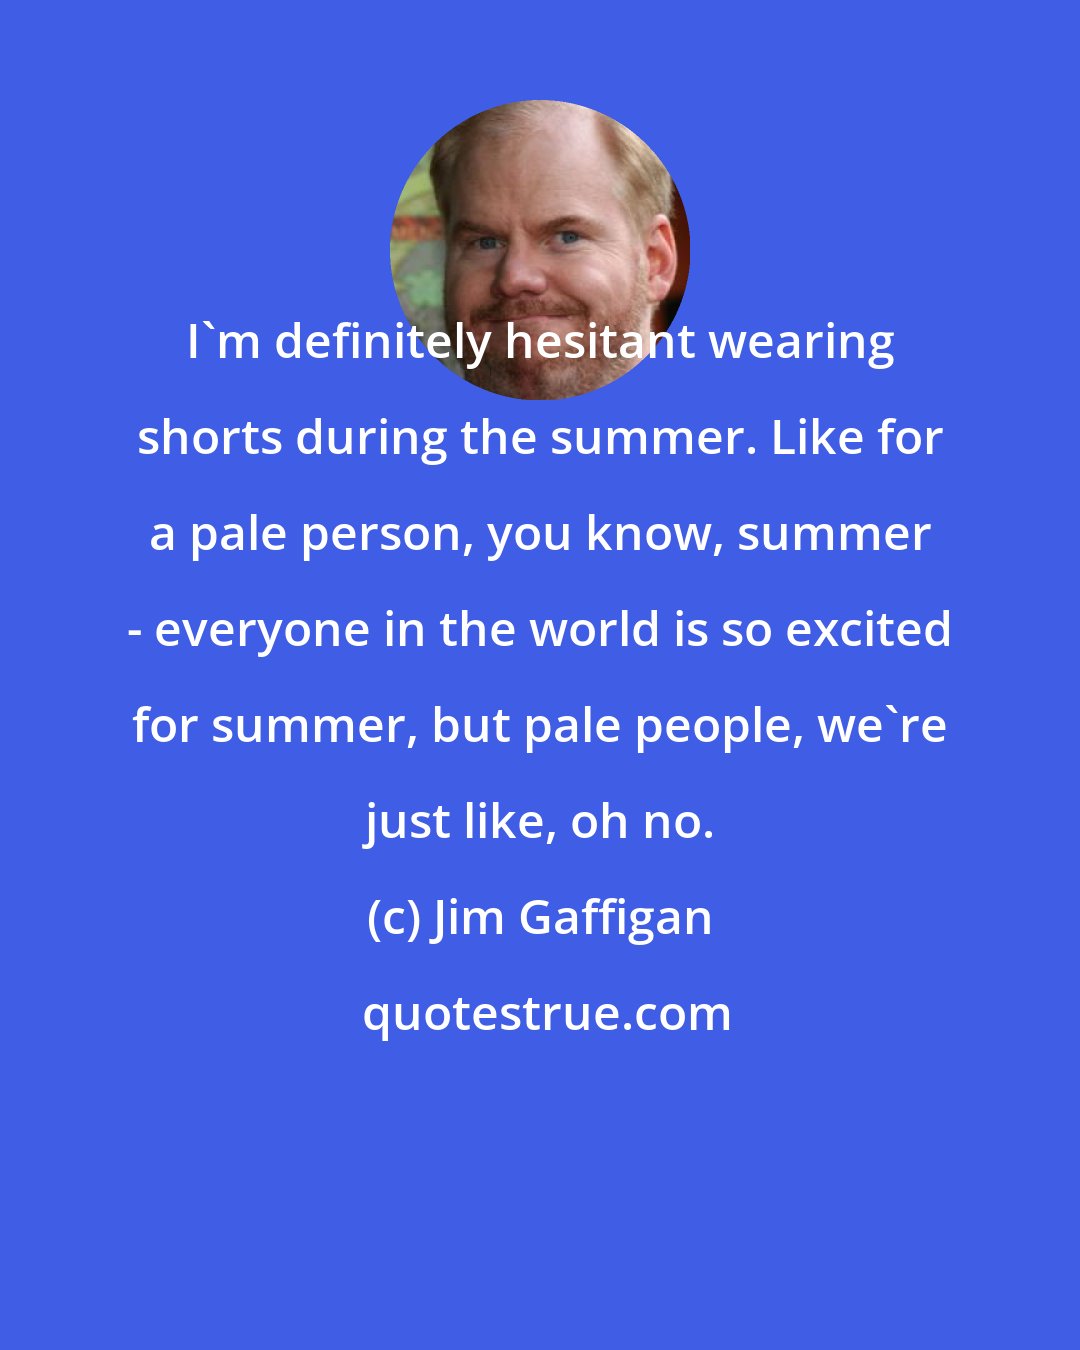 Jim Gaffigan: I'm definitely hesitant wearing shorts during the summer. Like for a pale person, you know, summer - everyone in the world is so excited for summer, but pale people, we're just like, oh no.